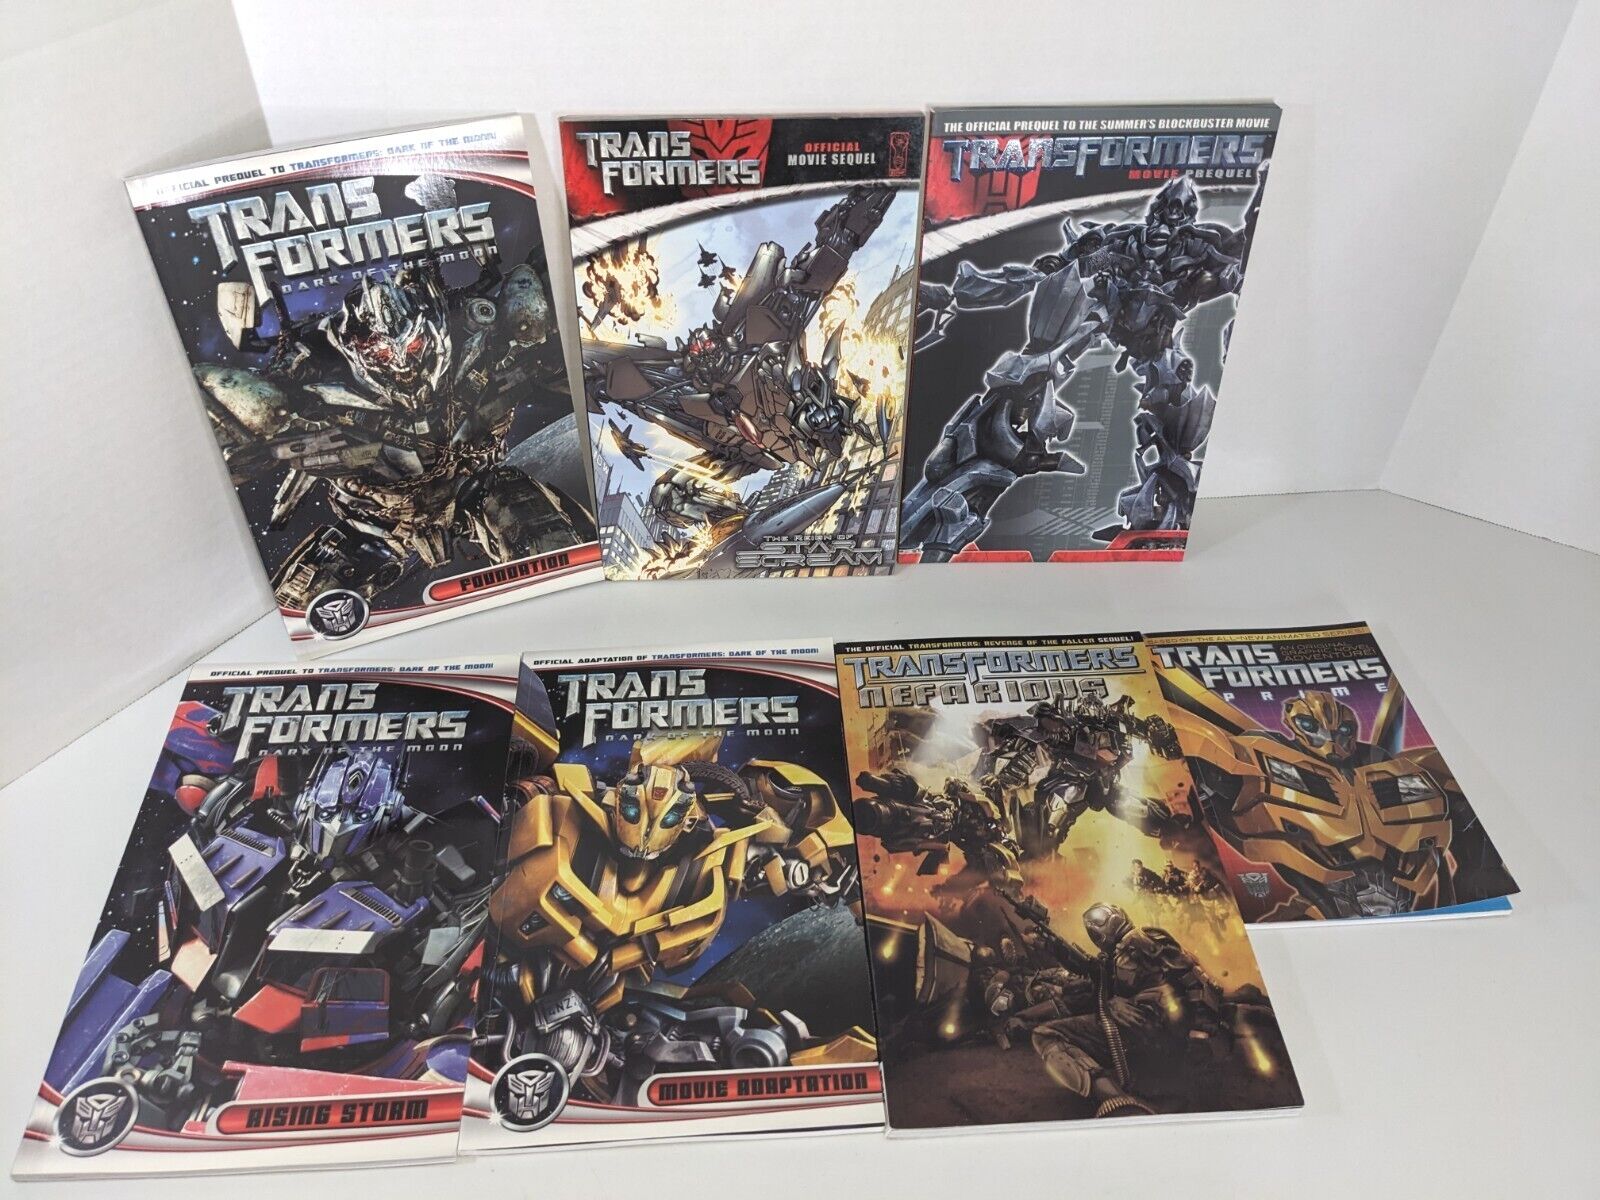 Transformers: Lot of 7 Hard-to-Find Trade Paperbacks Graphic Novels Books RARE